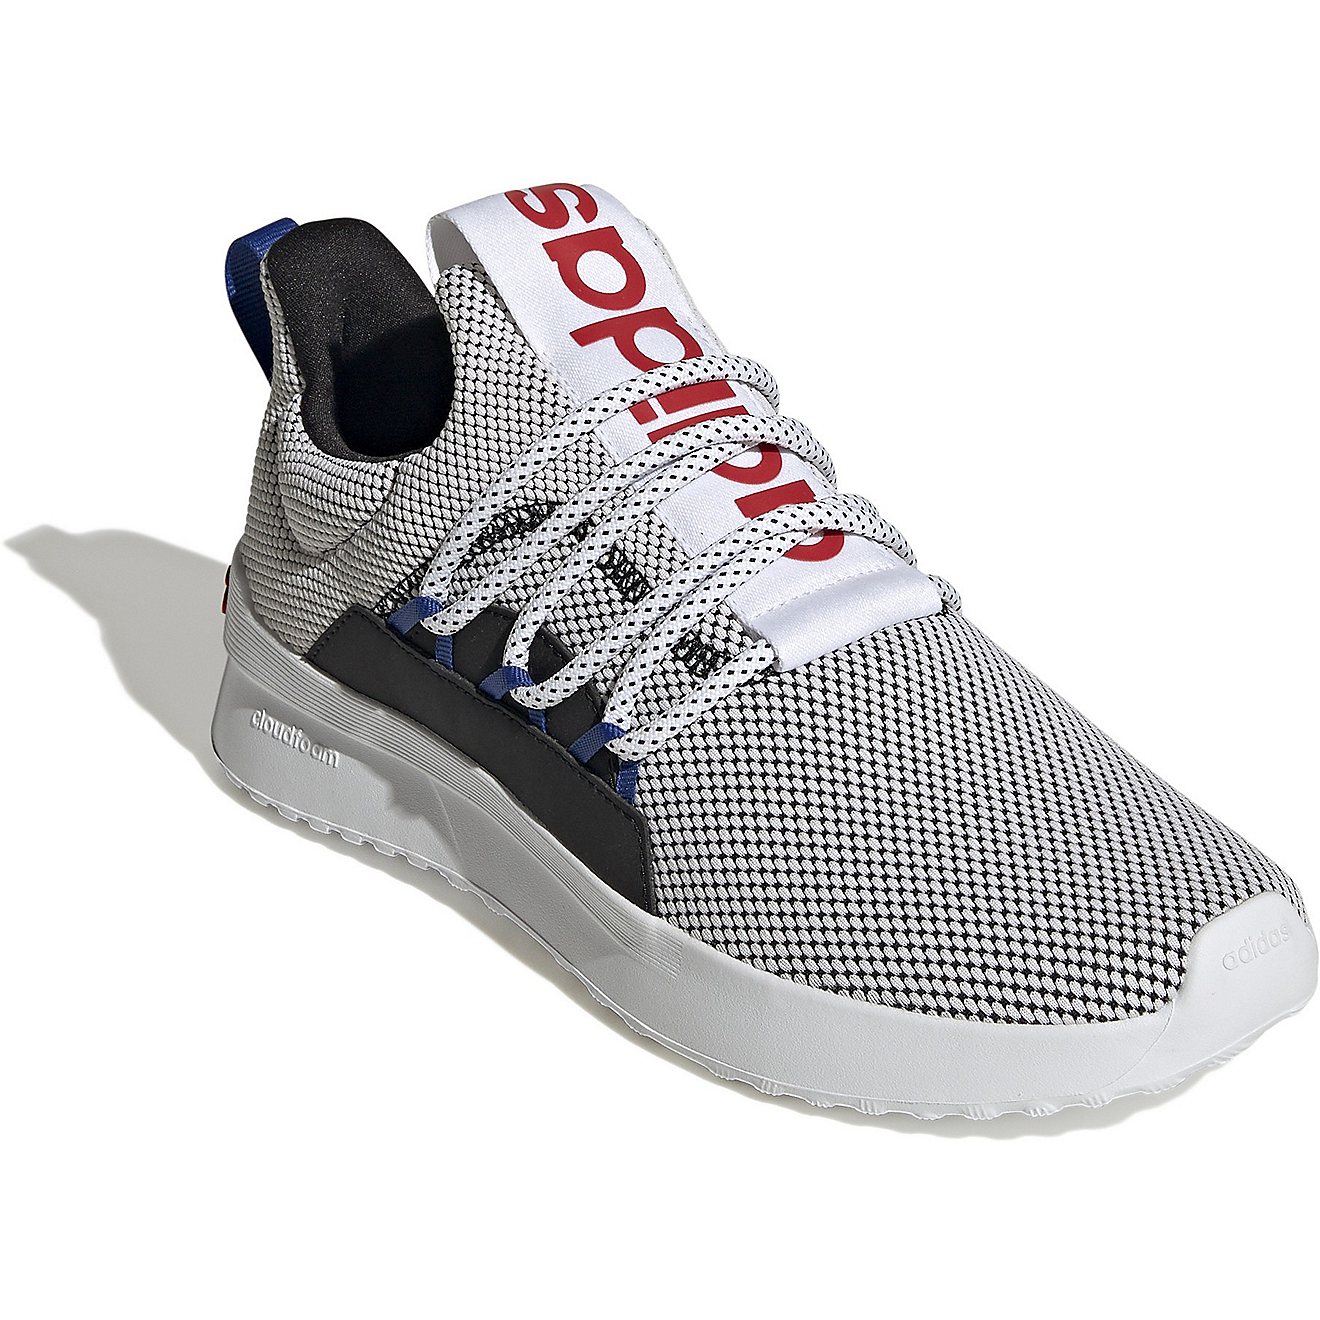 adidas Men's Lite Racer Adapt 5.0 Running Shoes                                                                                  - view number 3